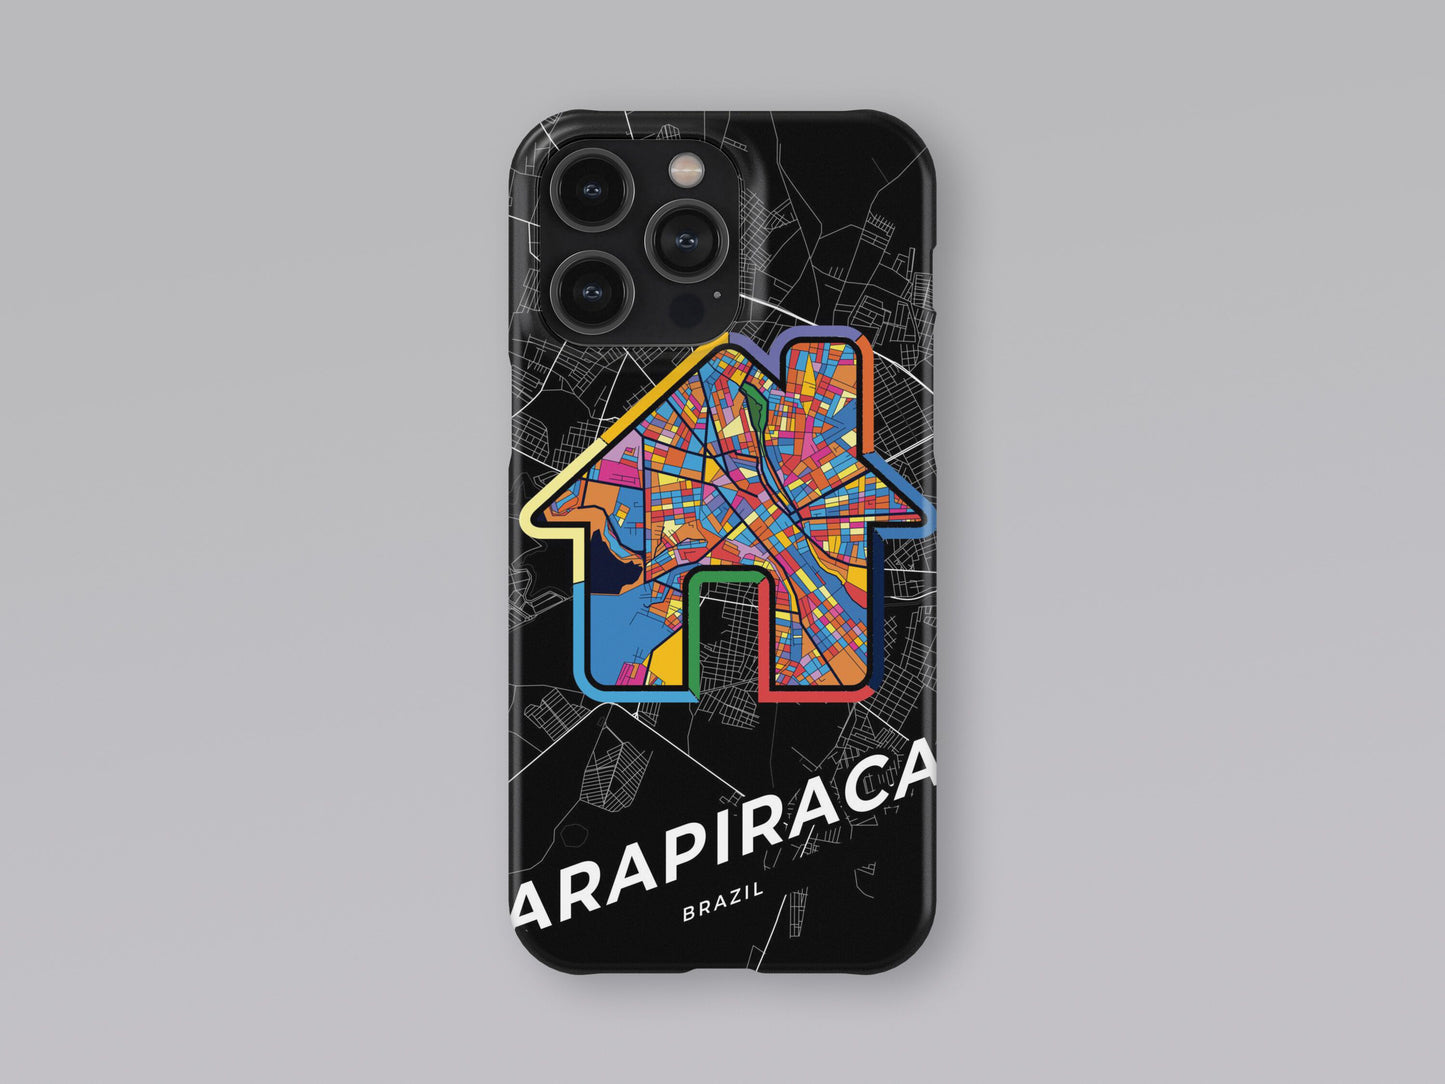 Arapiraca Brazil slim phone case with colorful icon. Birthday, wedding or housewarming gift. Couple match cases. 3